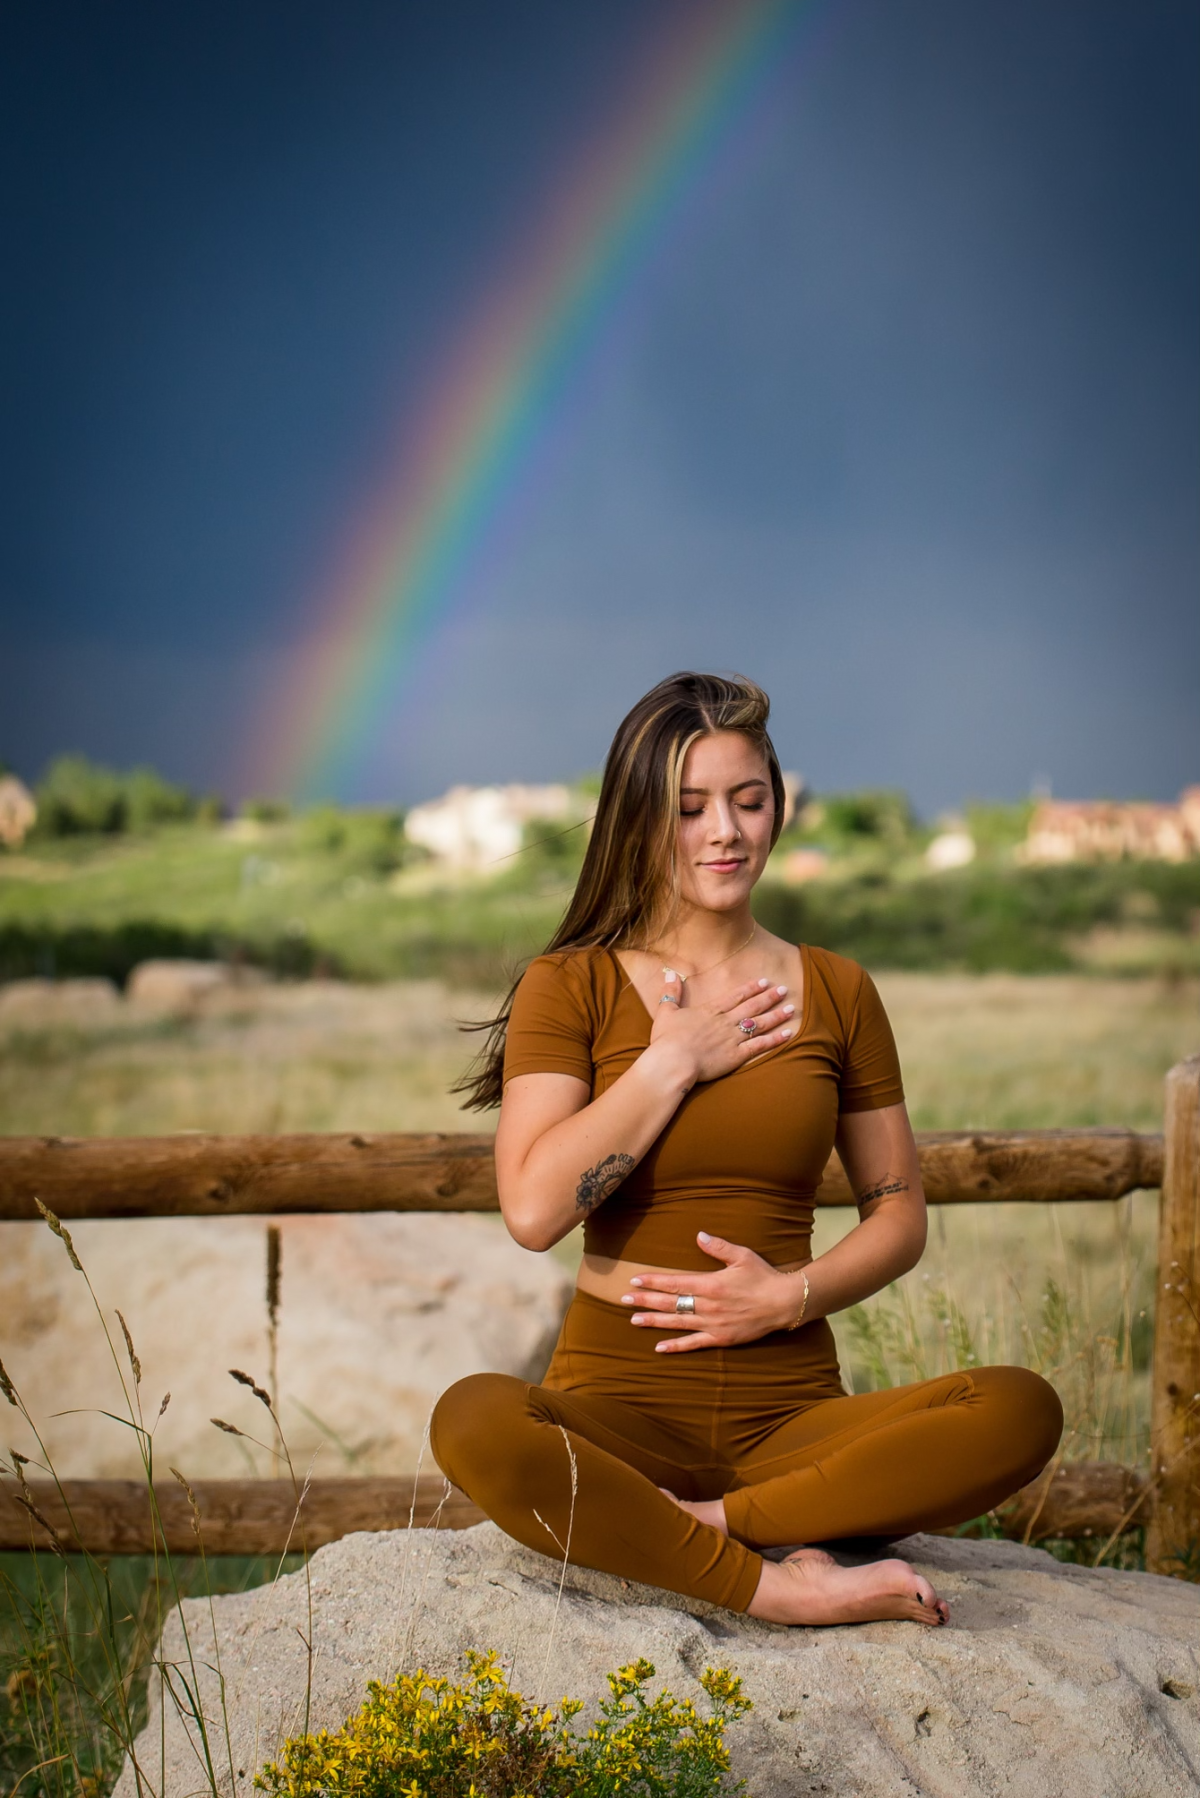 Kristen, a yoga instructor, meditates in a nature setting with a rainbow behind her.